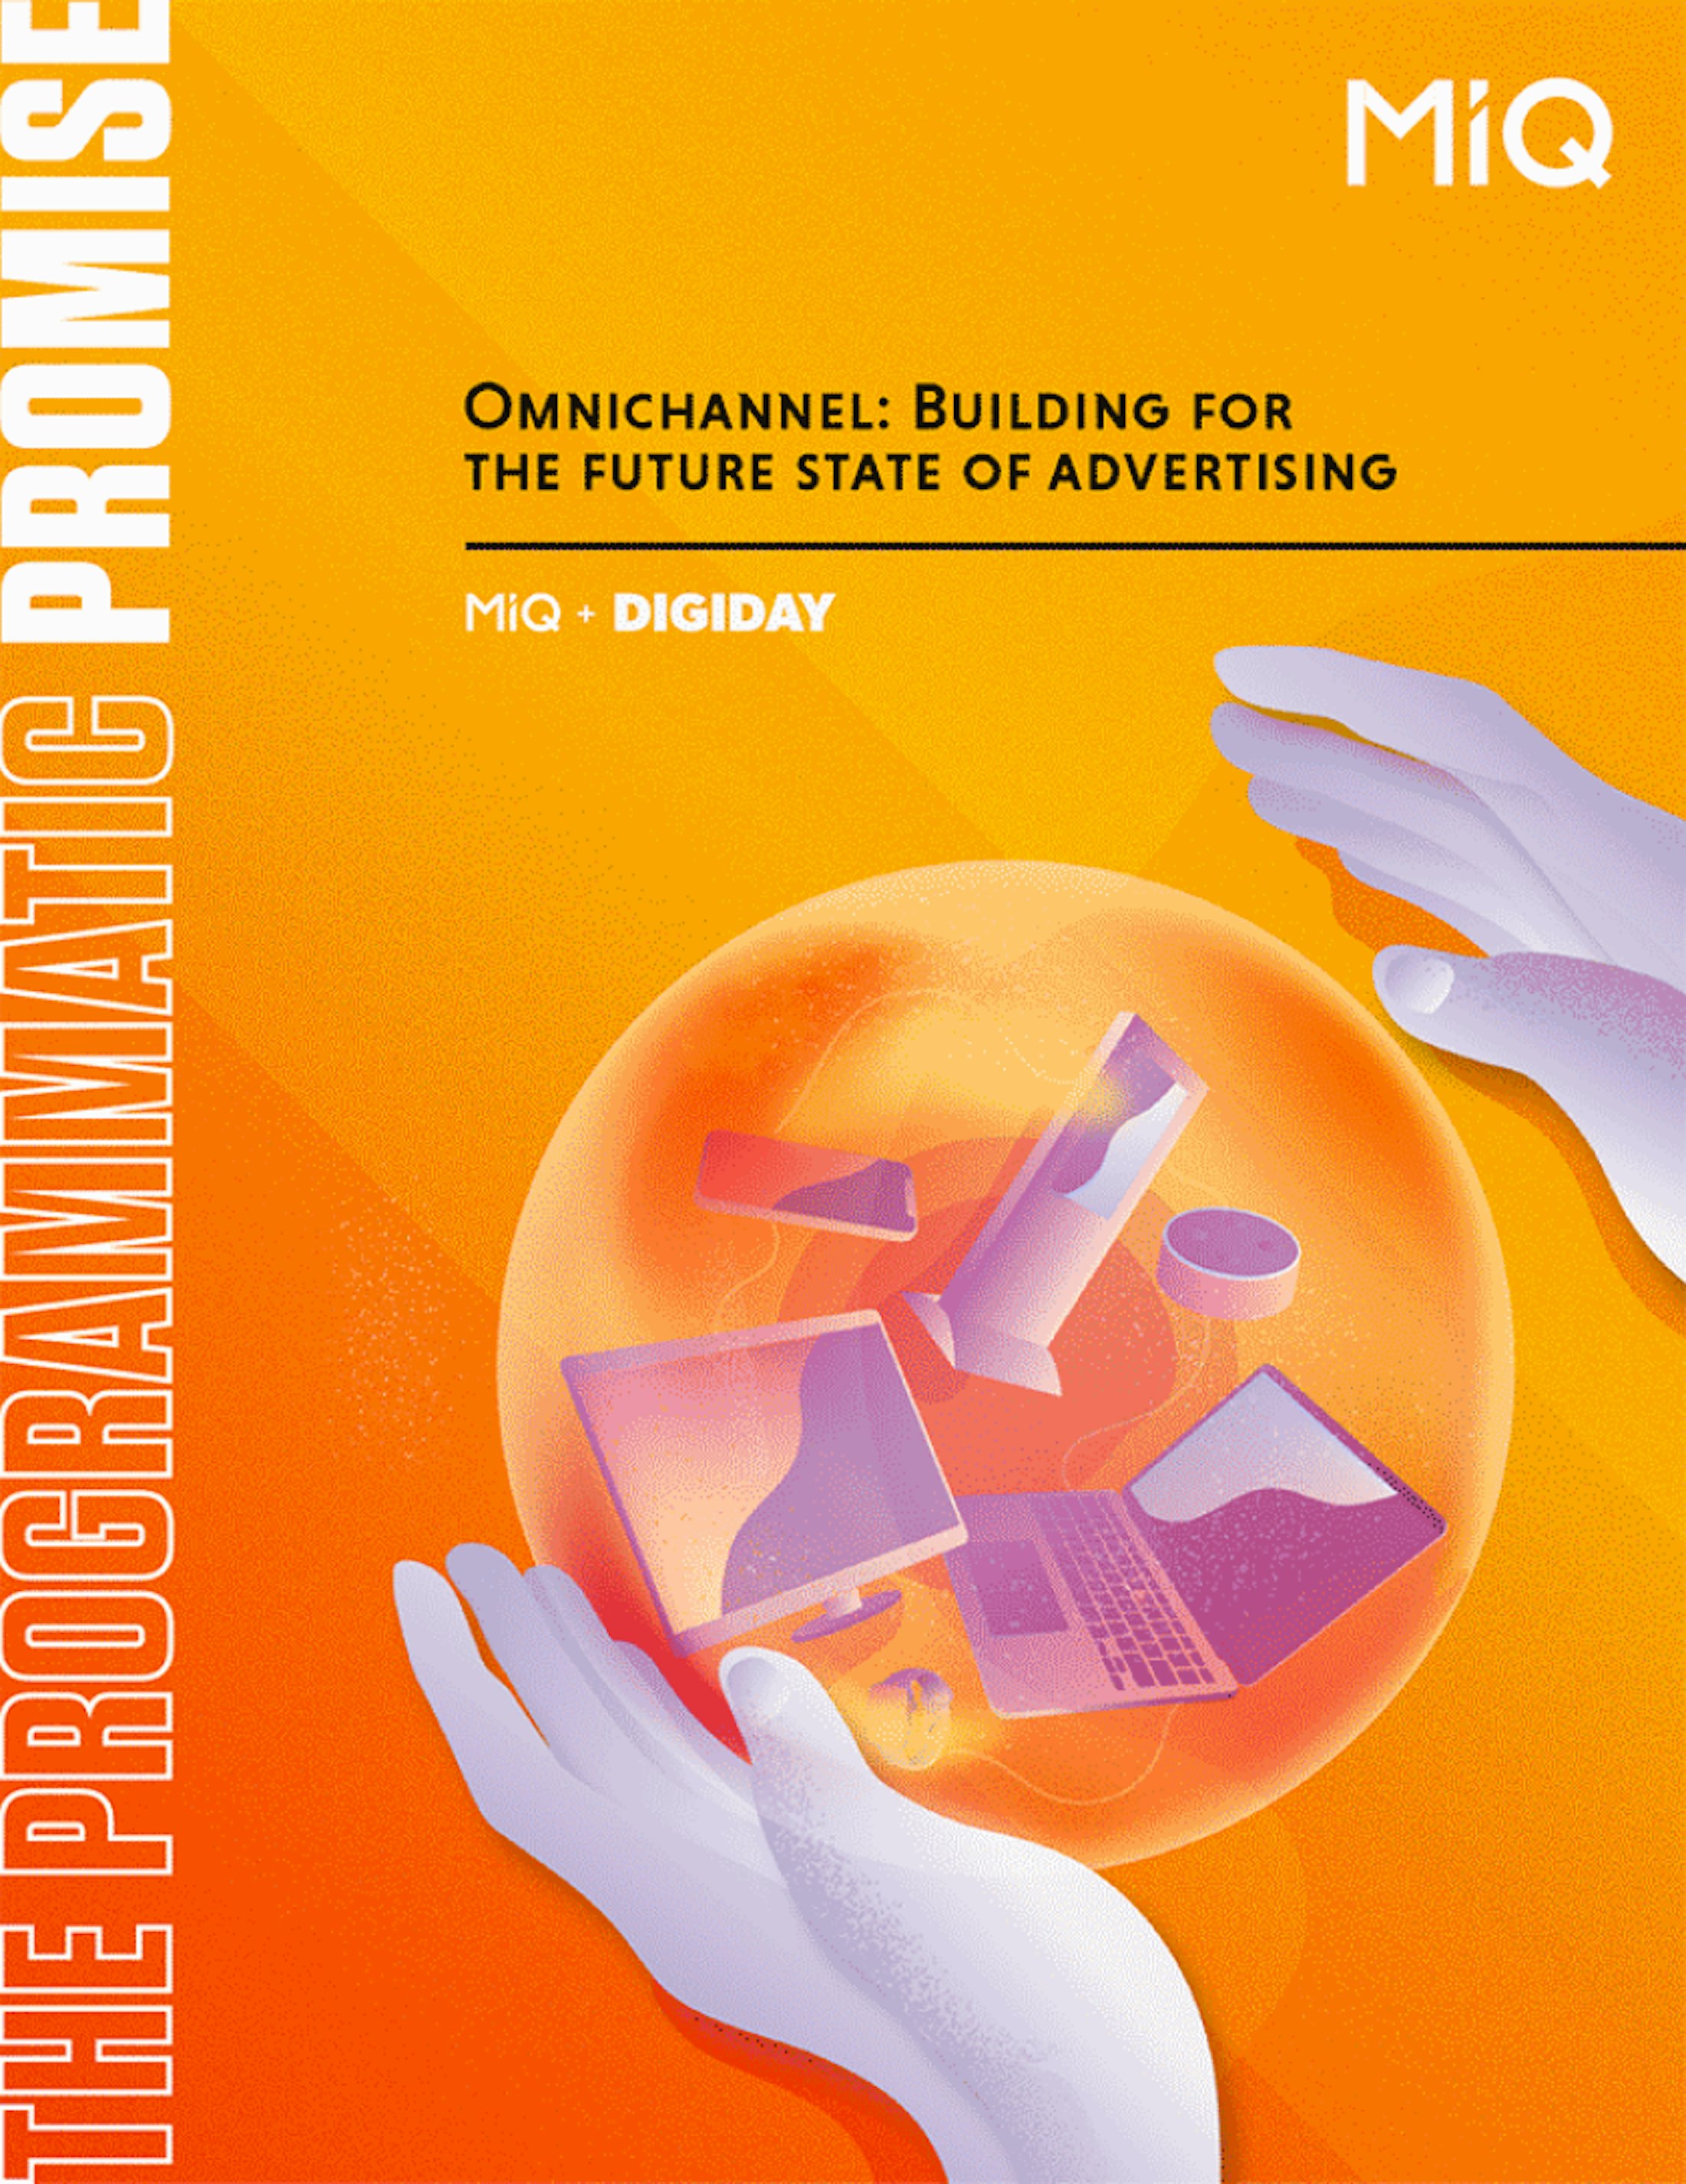 Omnichannel: building for the future of advertising